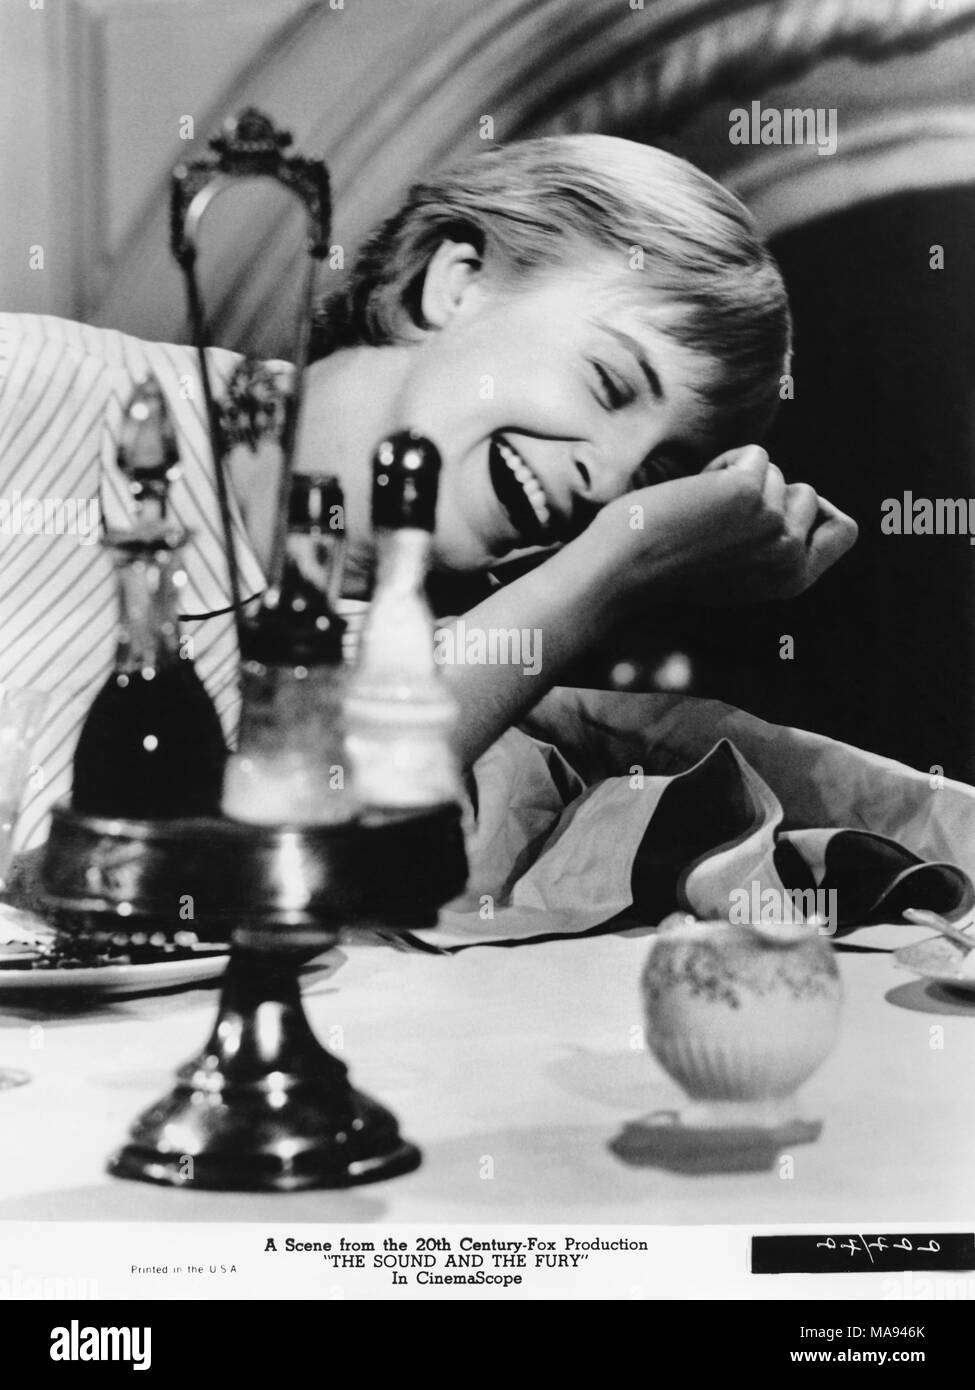 Joanne Woodward, Publicity Portrait, on-set of the Film, "The Sound and the Fury", 20th Century Fox, 1959 Stock Photo